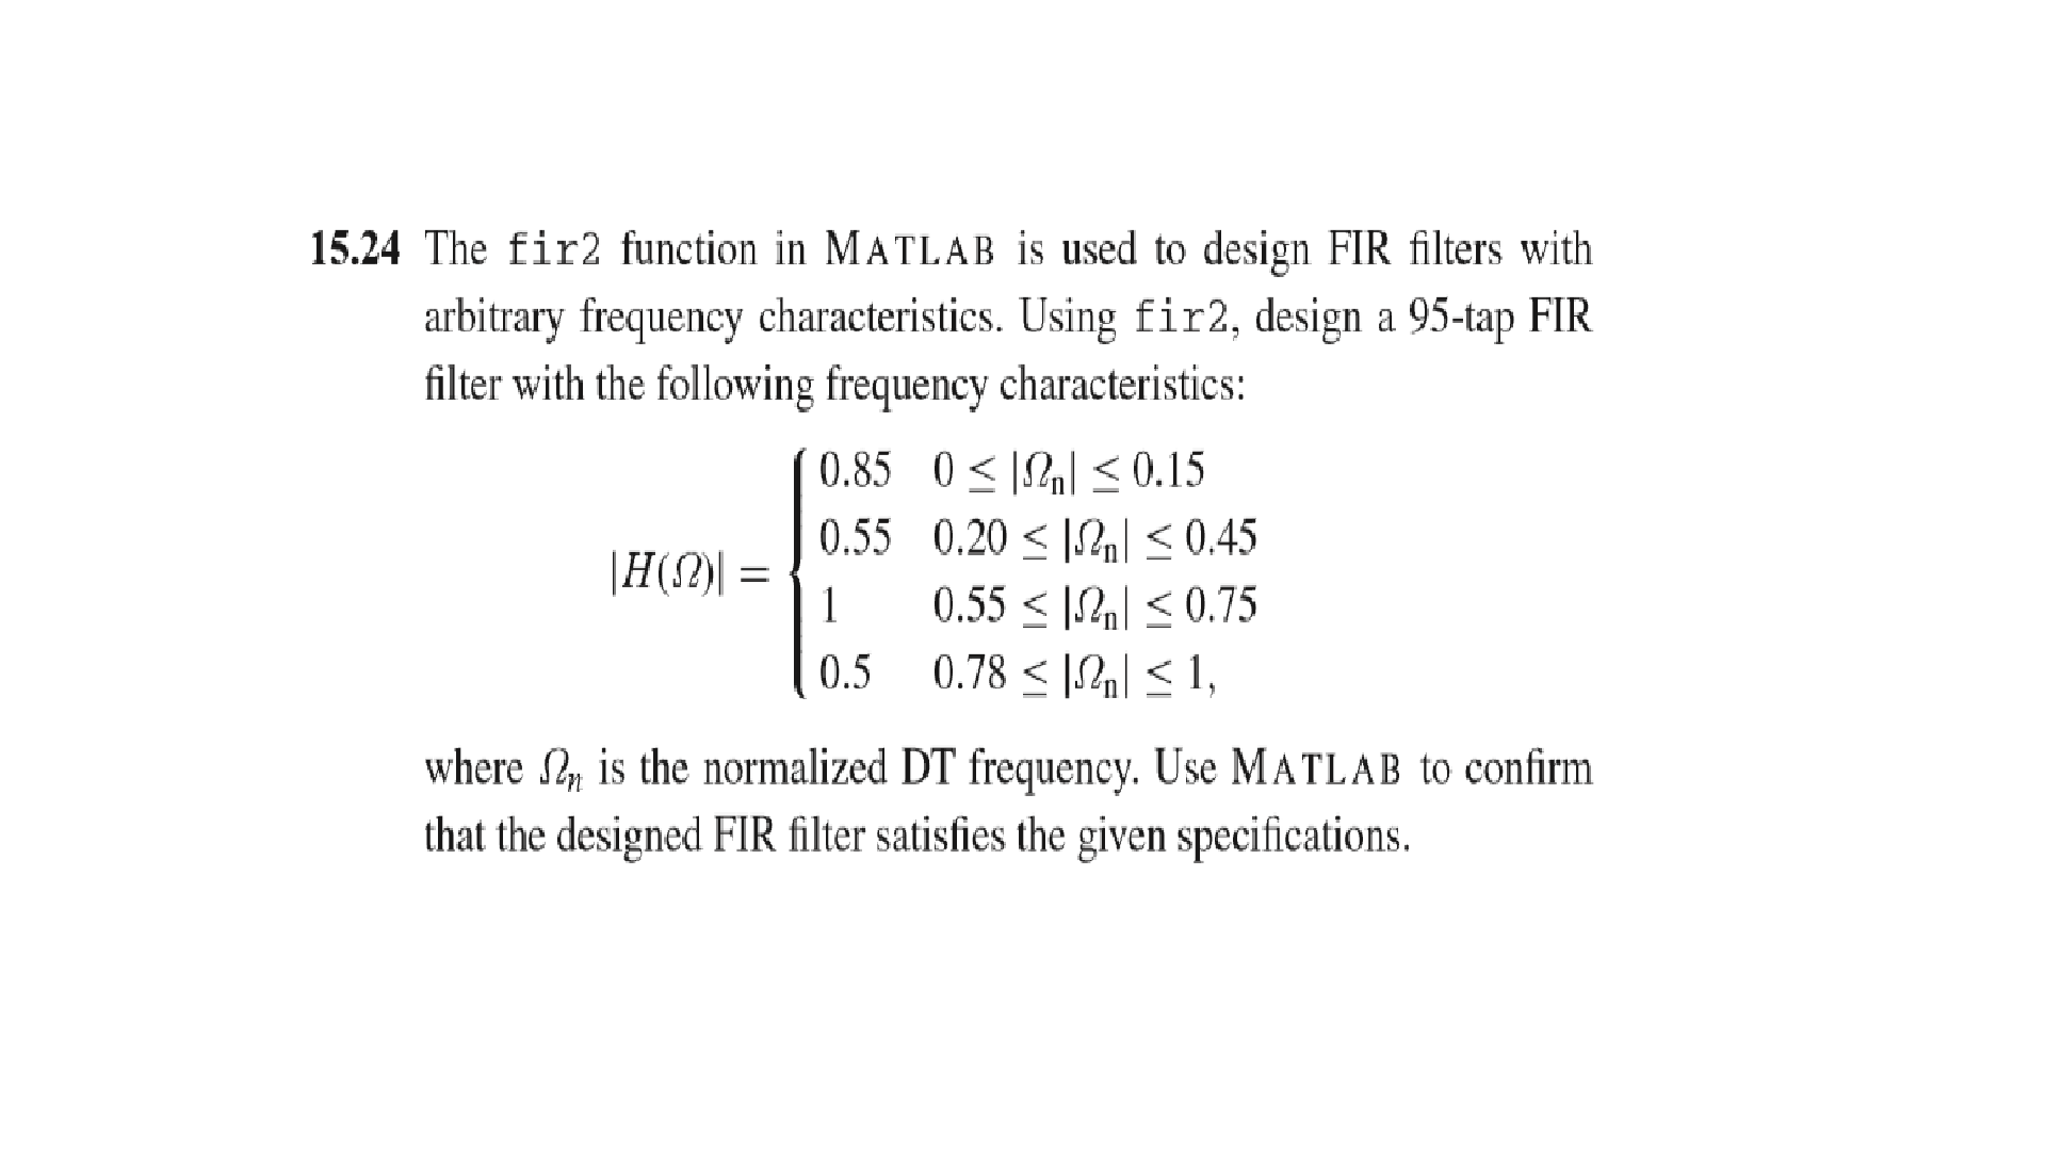 Solved: The Fir2 Function In Matlab Is Used To Design FIR ...